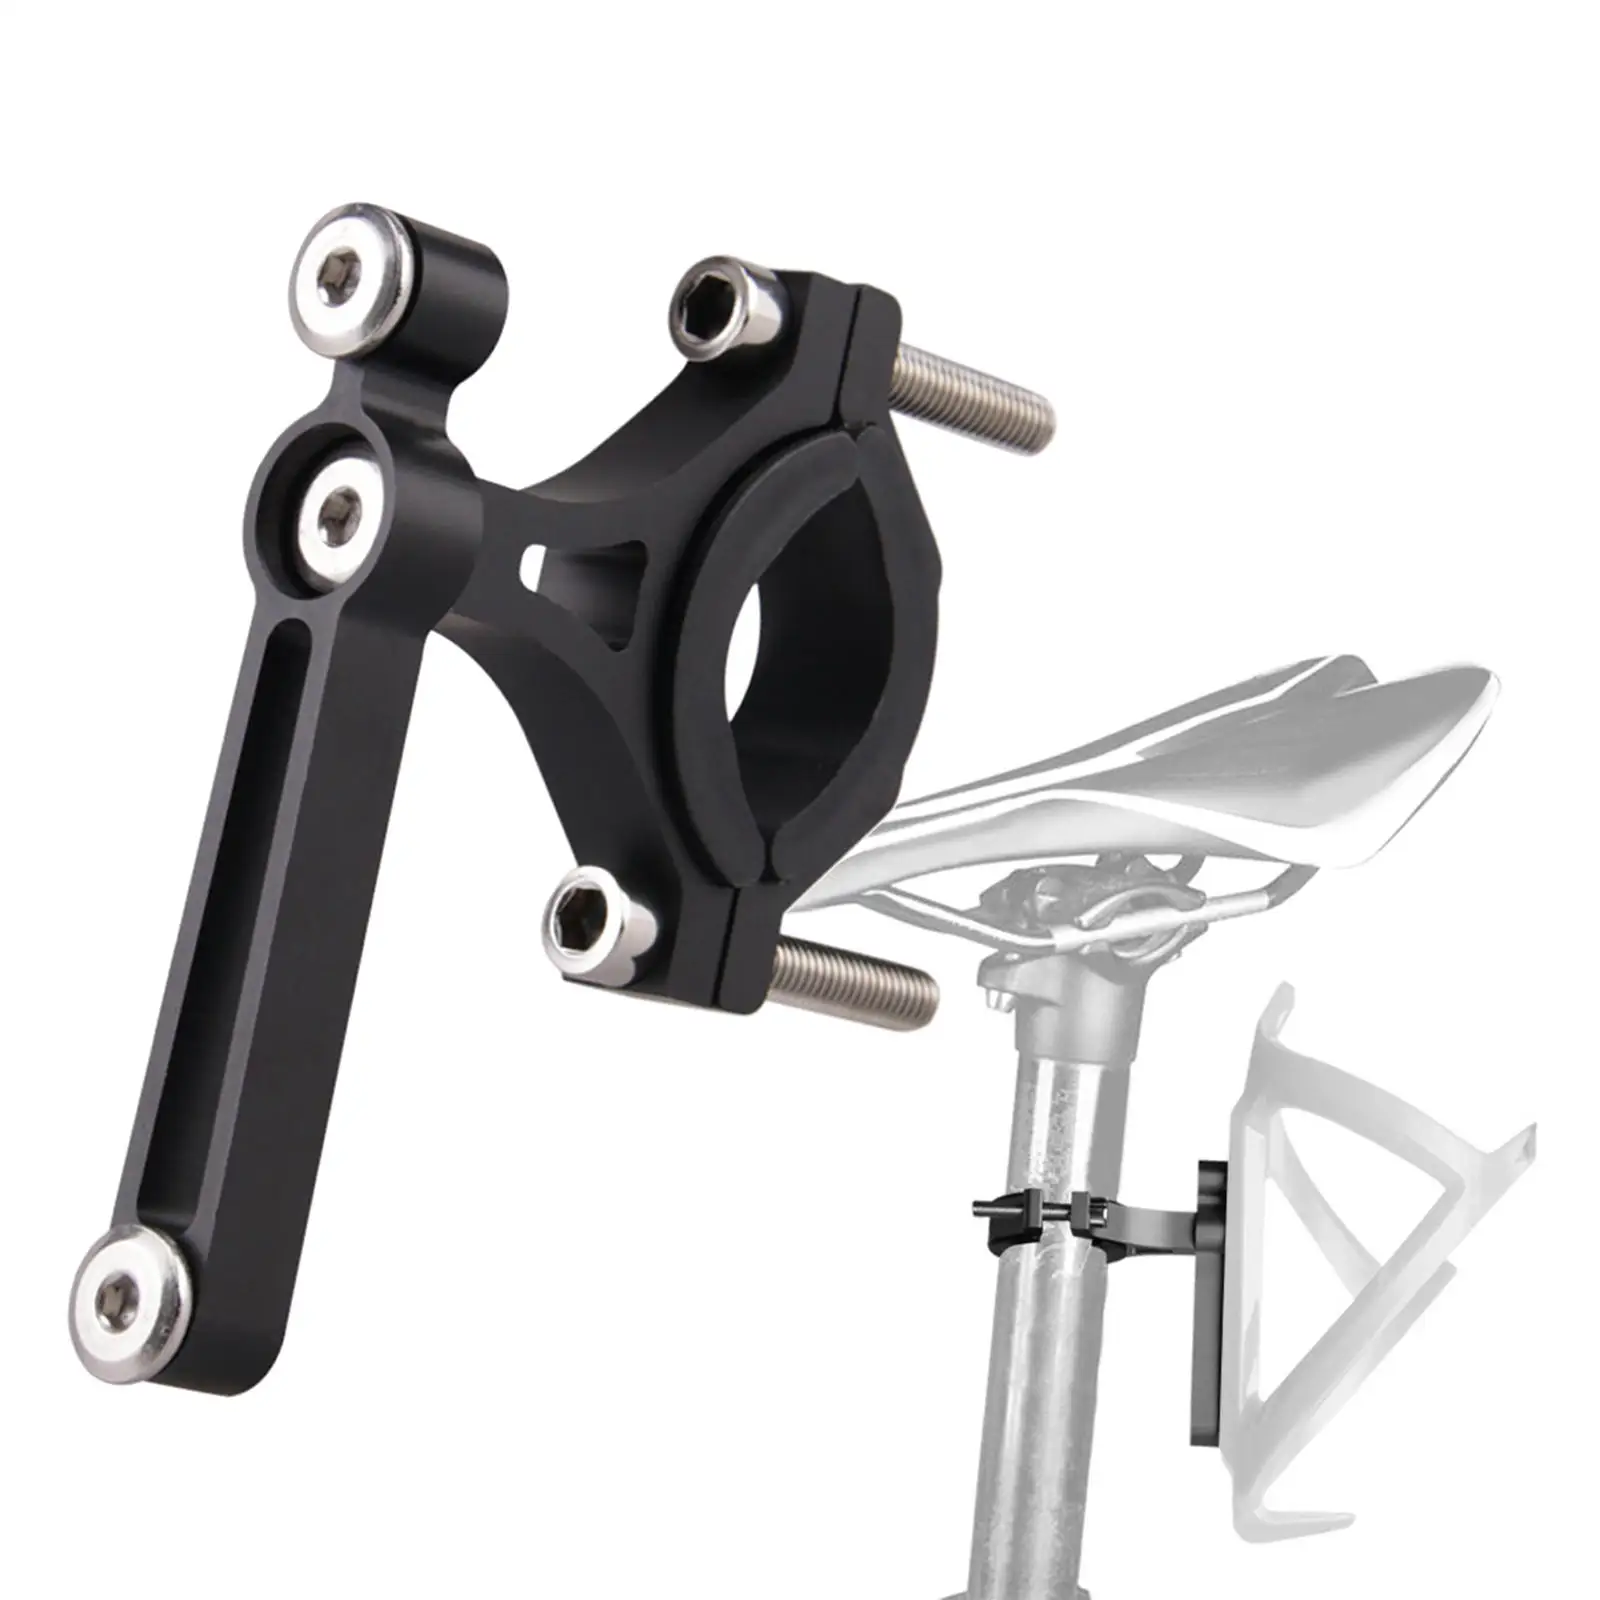 Bike Water Bottle Holder Clamp Clip Cage Mount Adapter for Bicycle Motorcycle